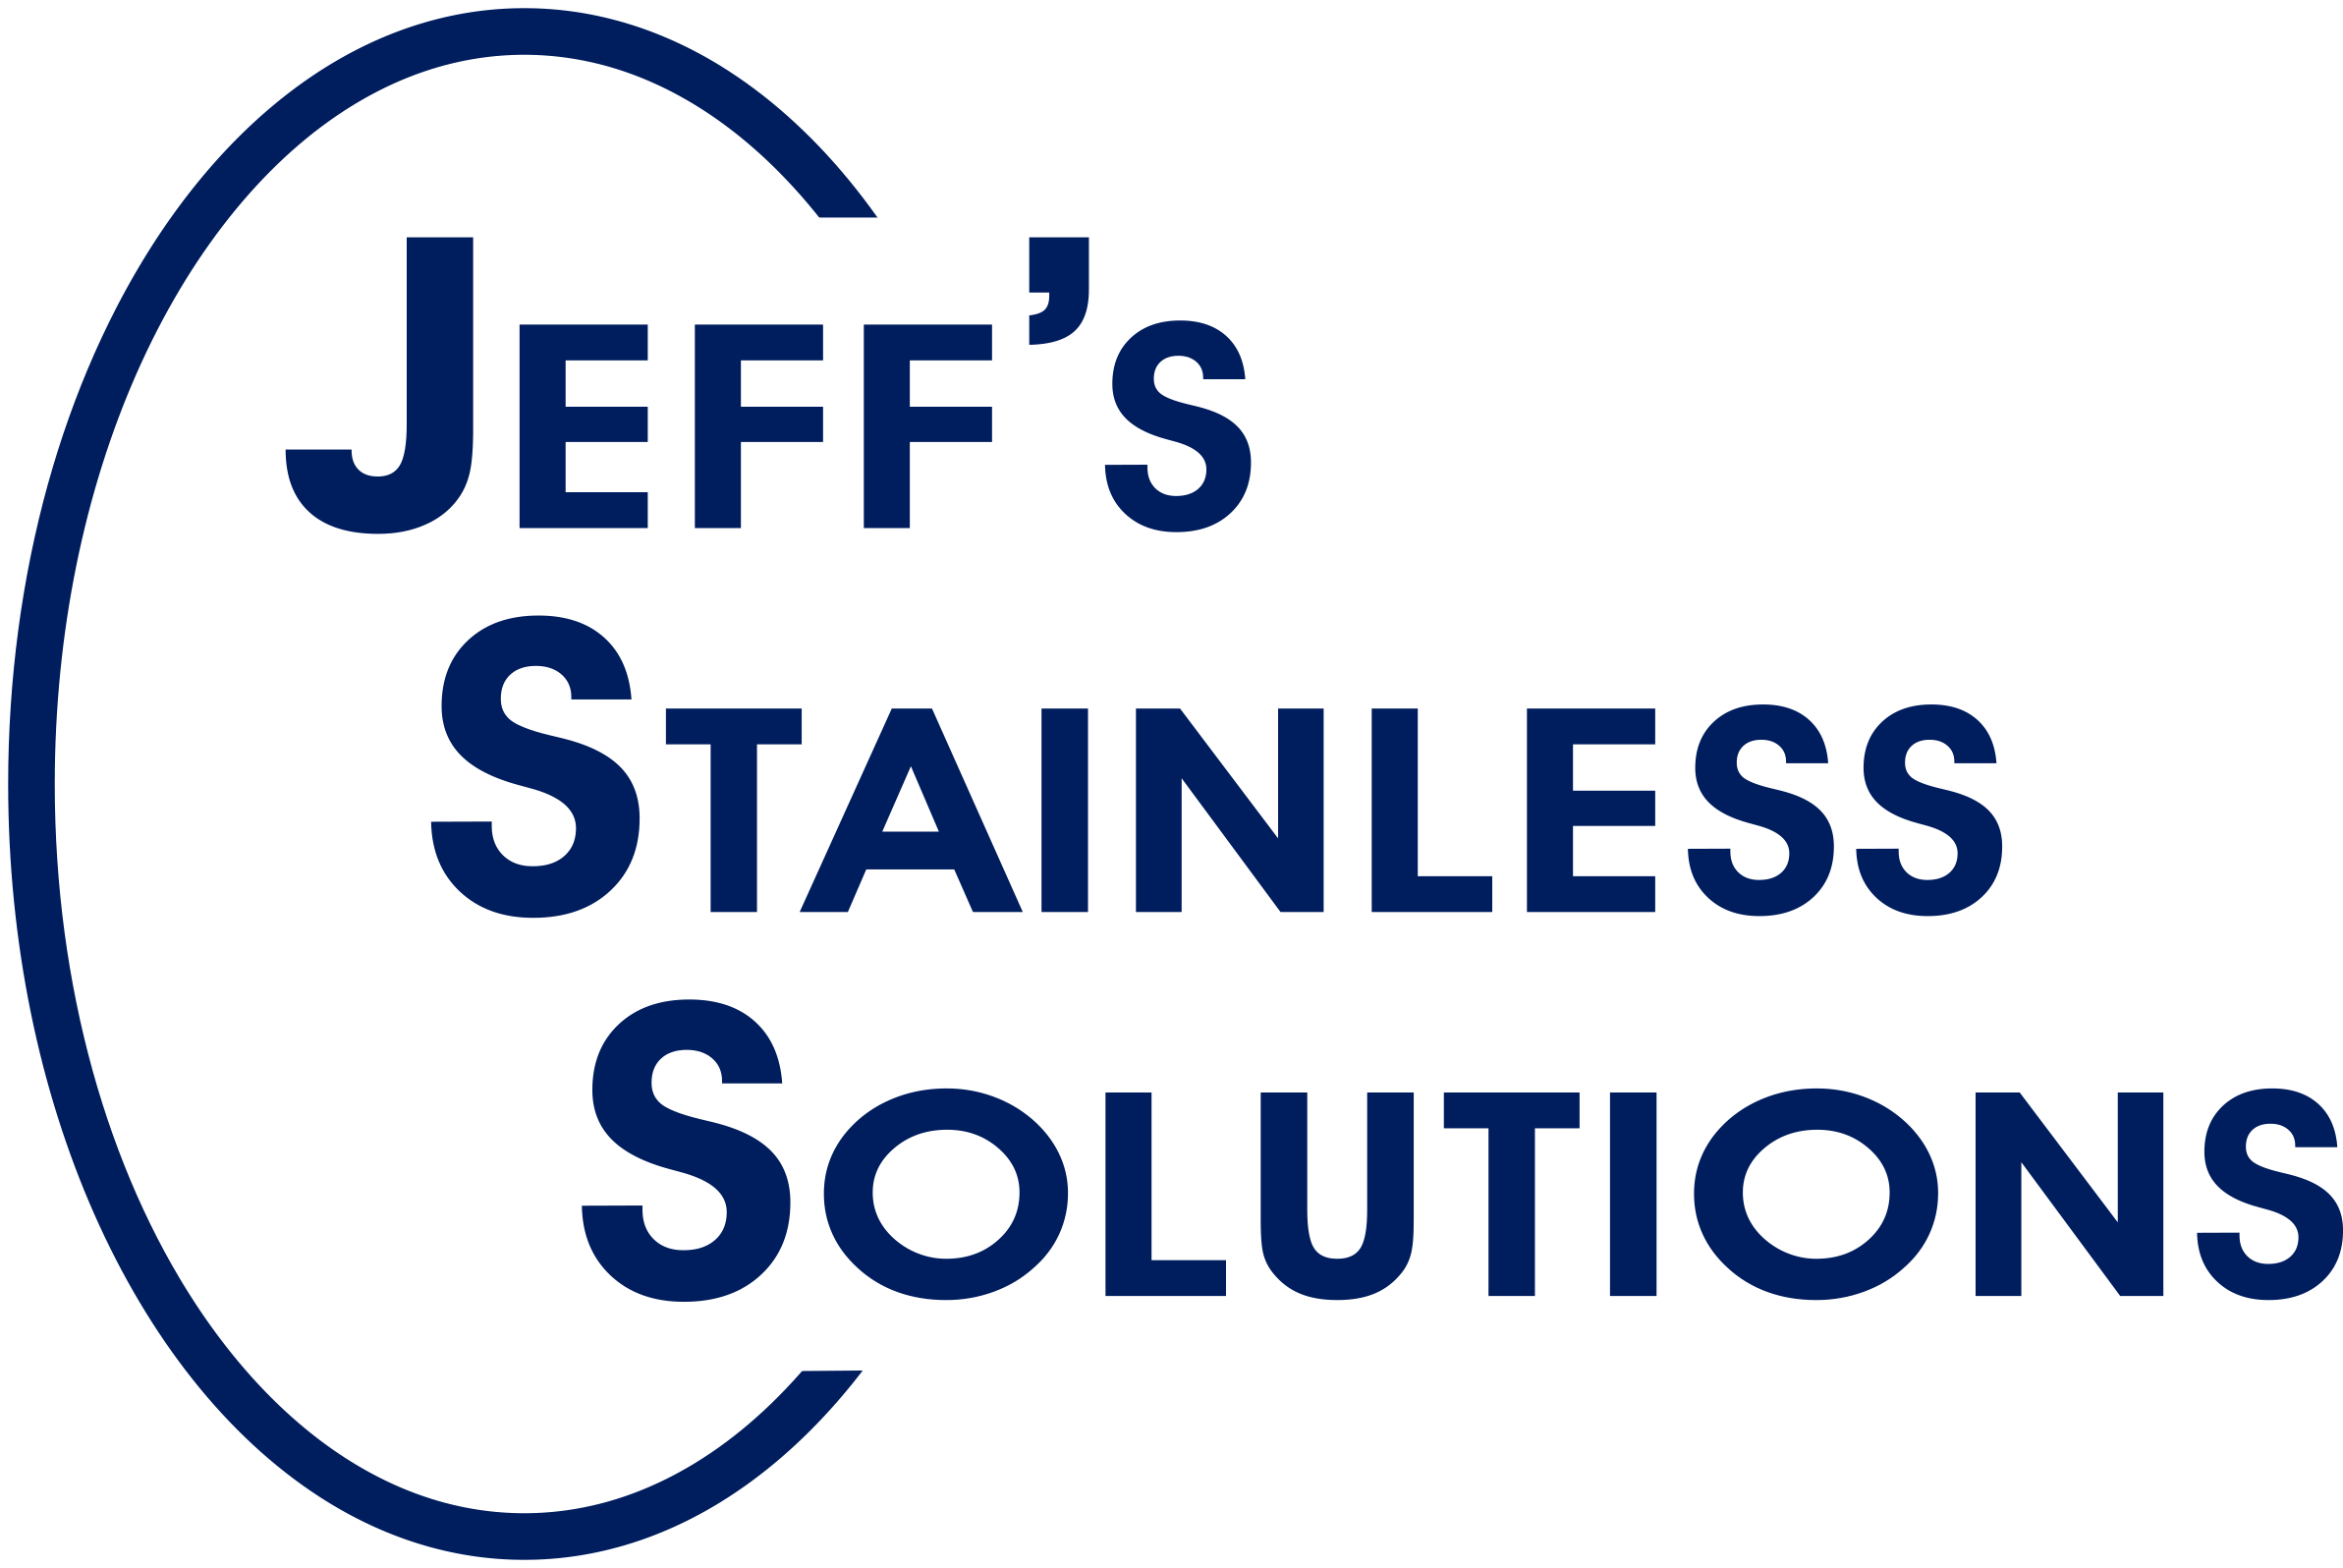 Jeff's Stainless Solutions Logo